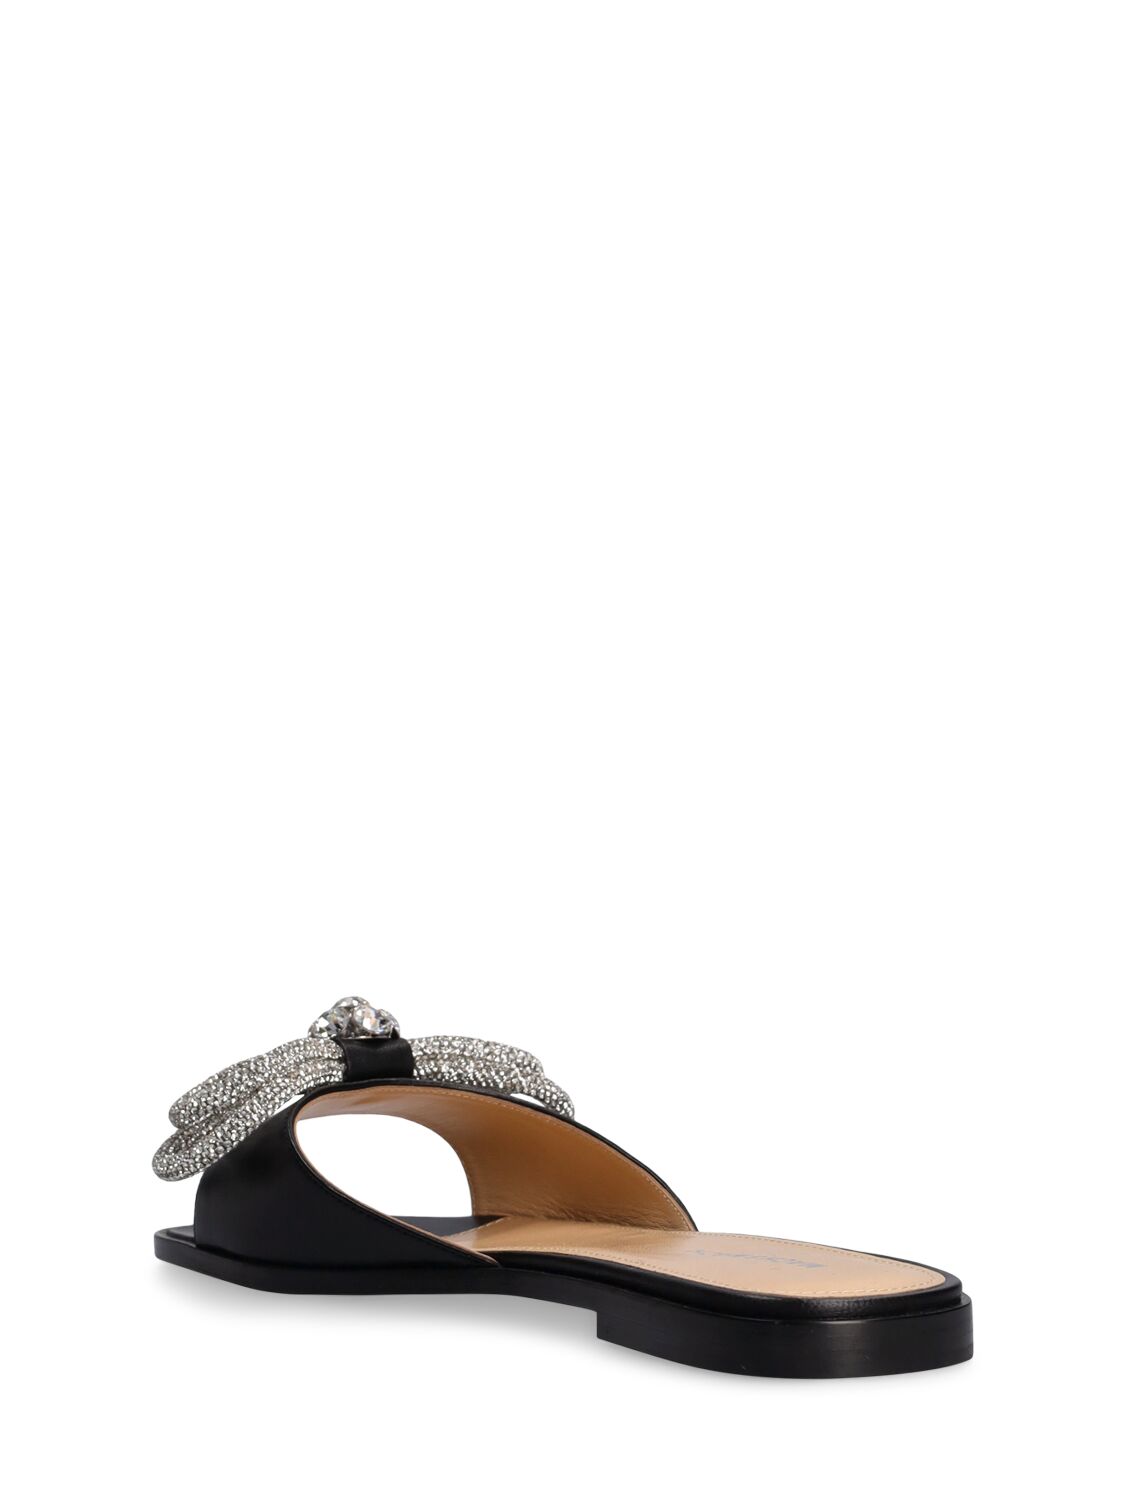 Shop Mach & Mach 10mm Double Bow Leather Flat Sandals In Black